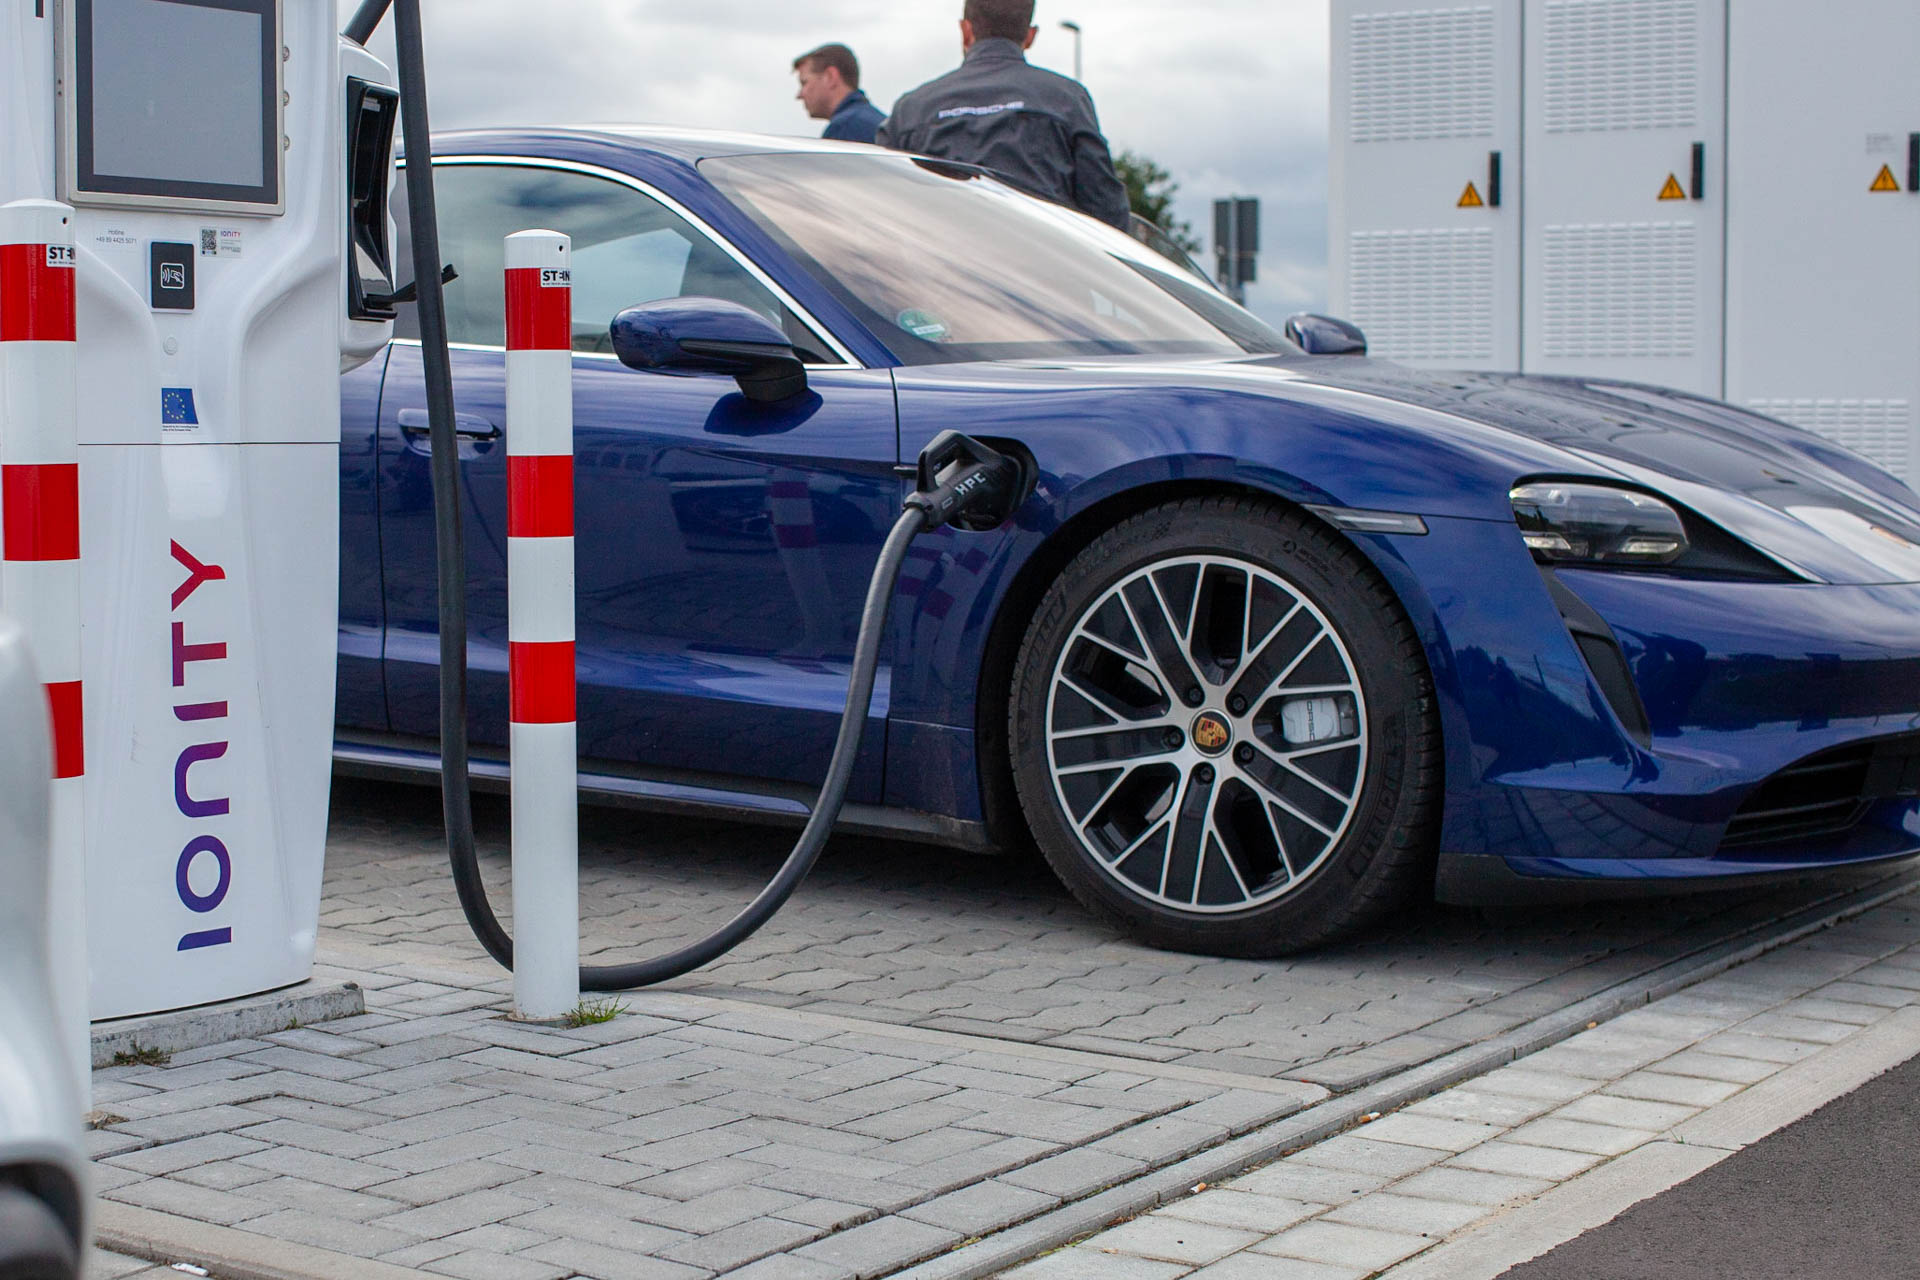 2020 Porsche Taycan Turbo high-speed charging hands-on: next step for EVs